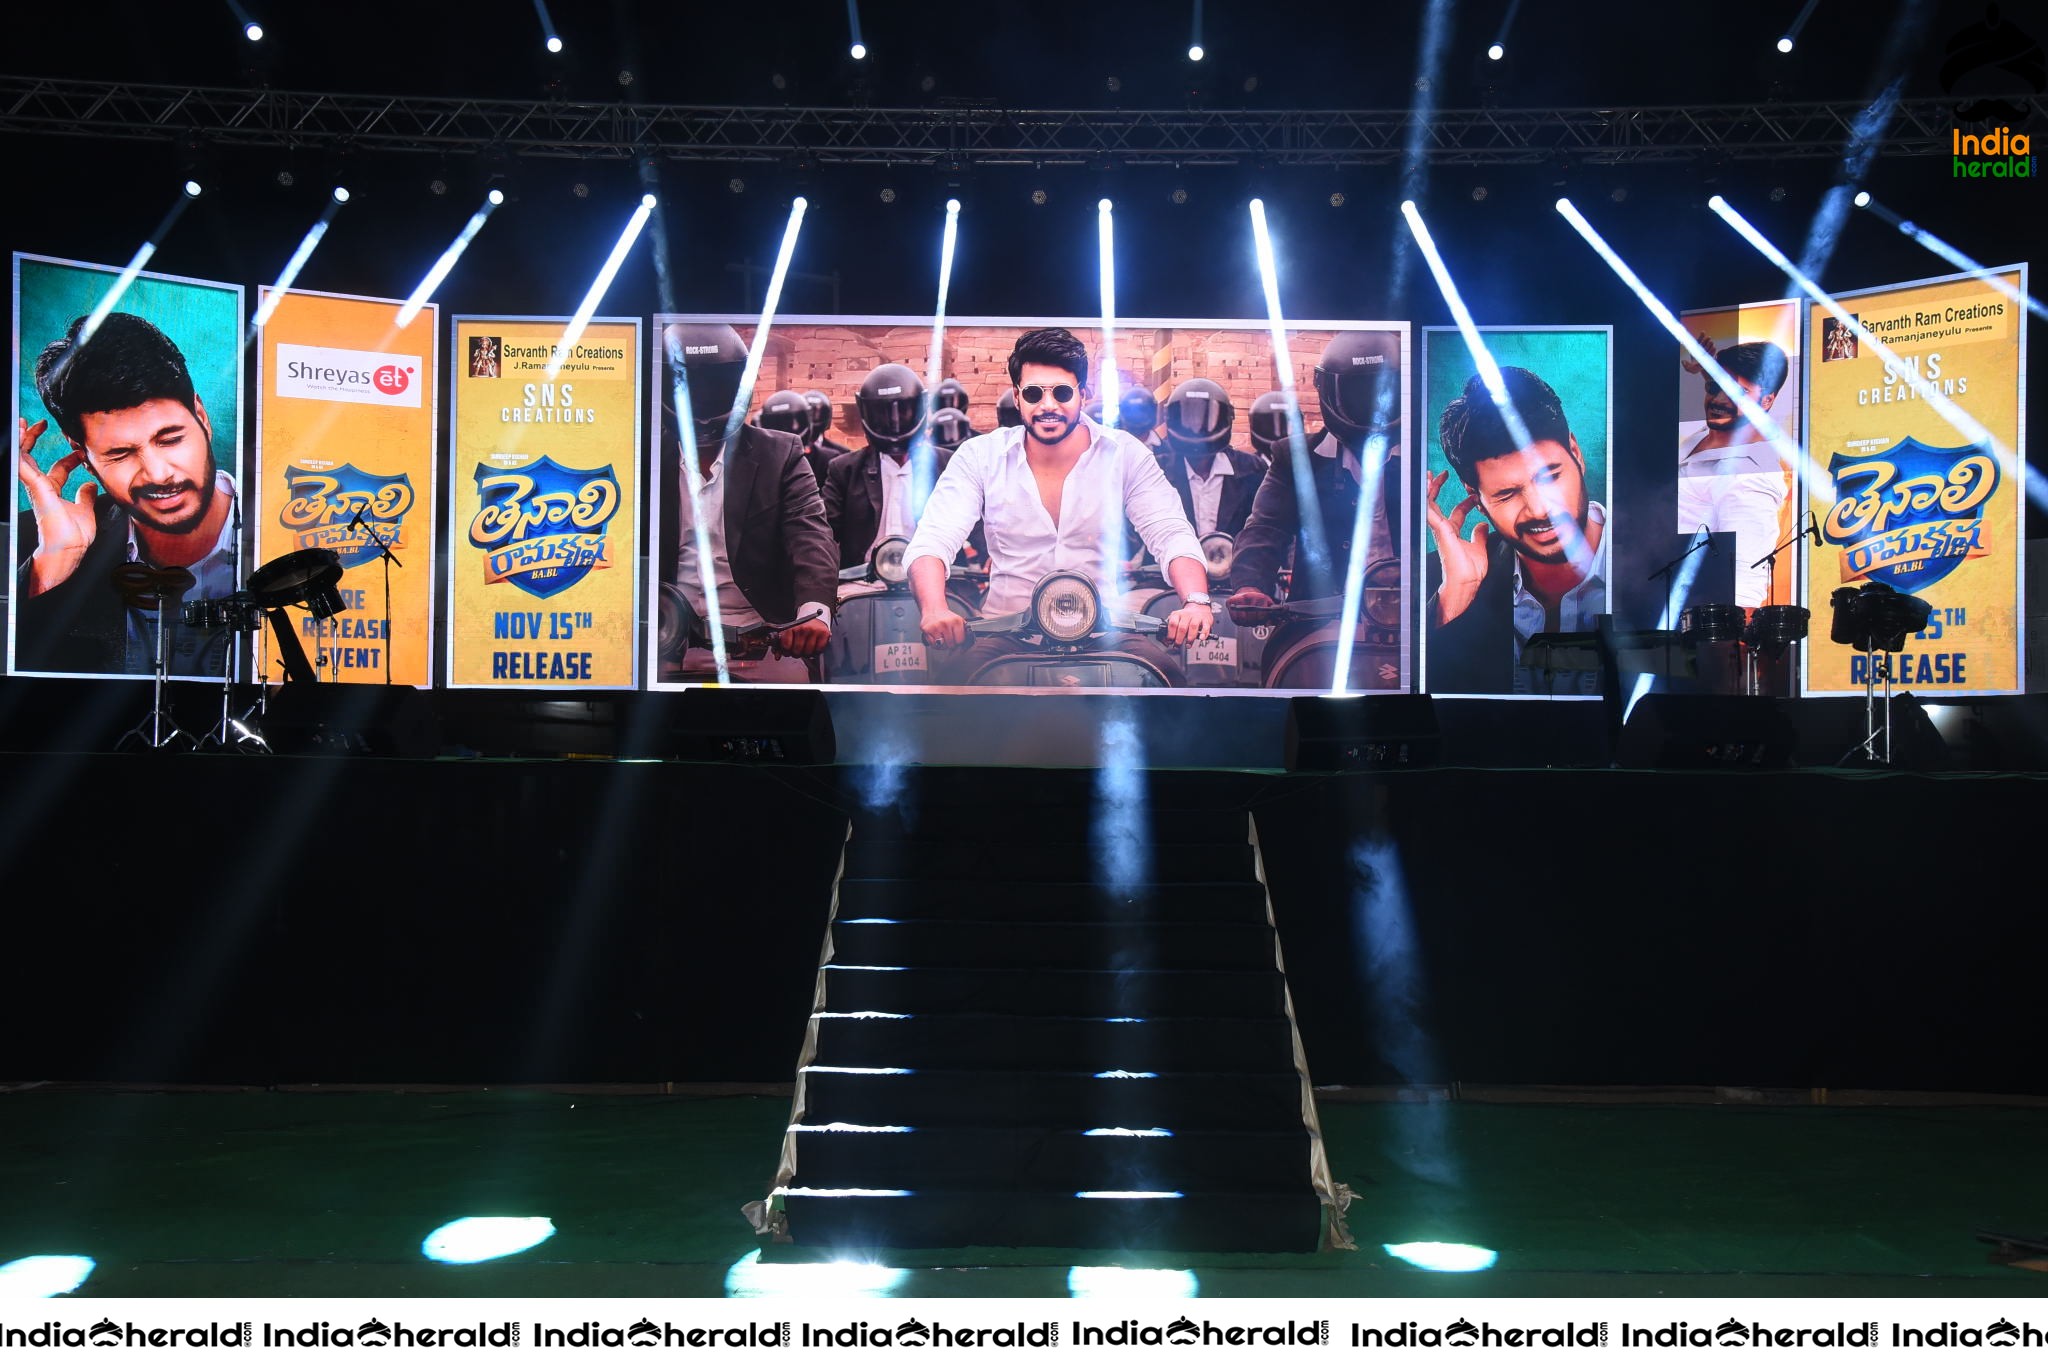 The Grand Stage and Entrance for Tenali Ramakrishna BA BL Pre Release Event Set 2